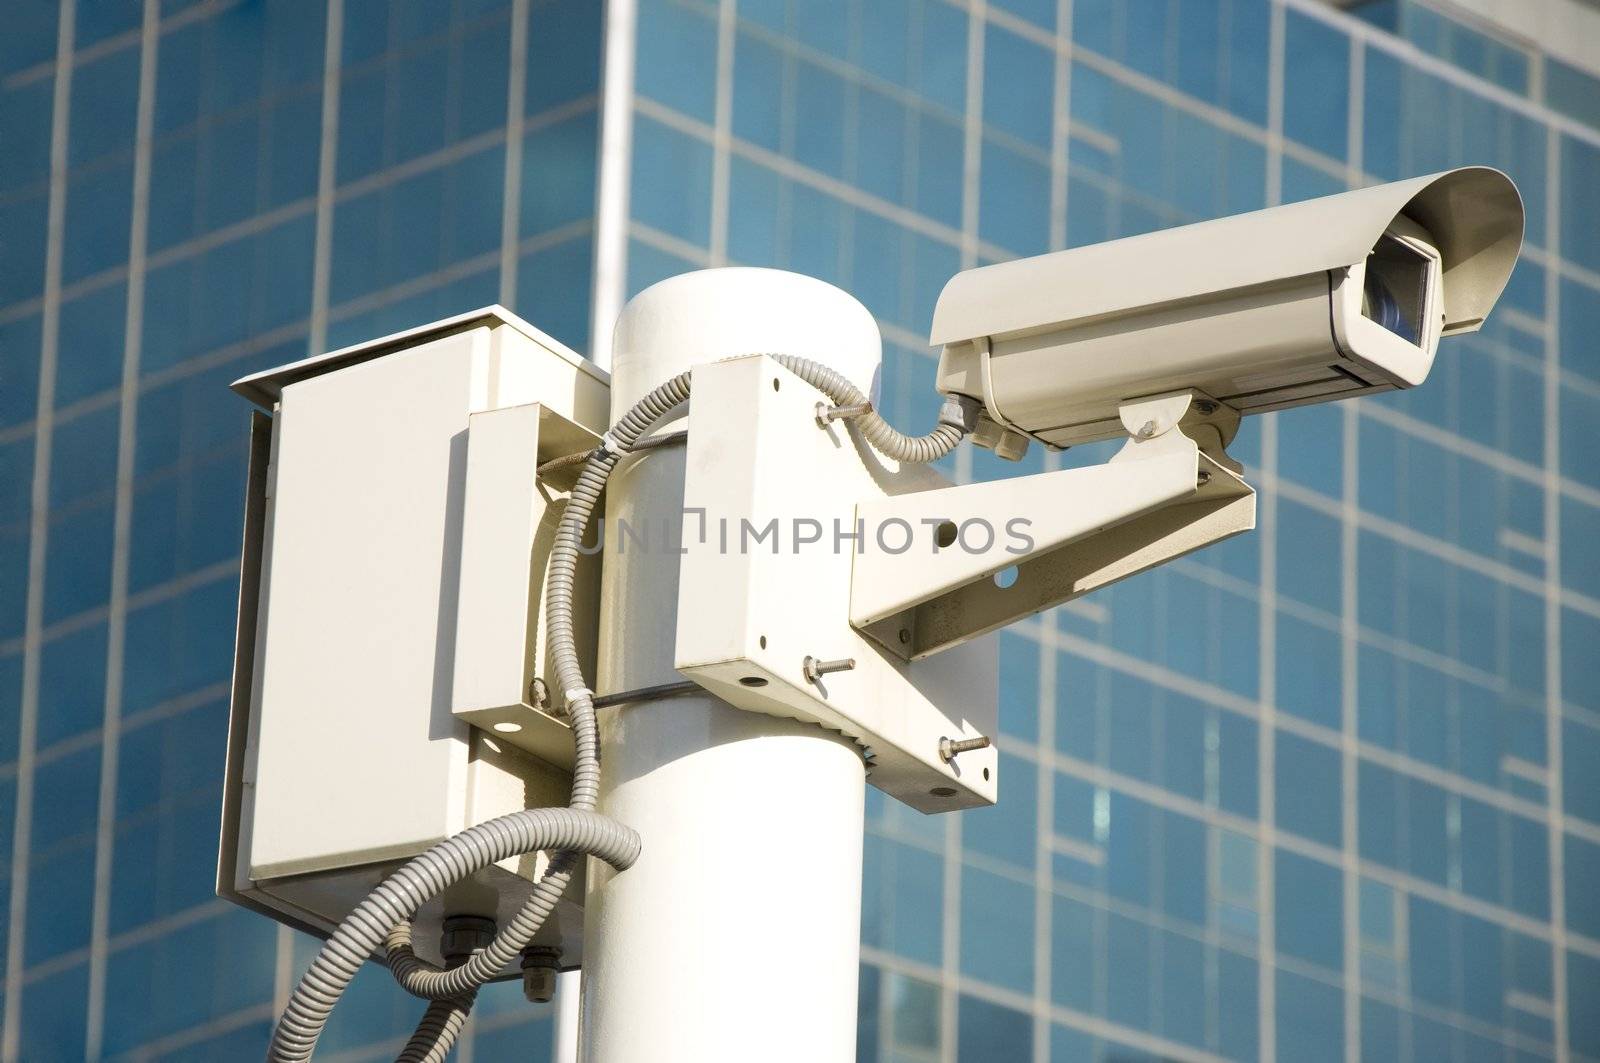 Independent security cameras in the city by joneshon